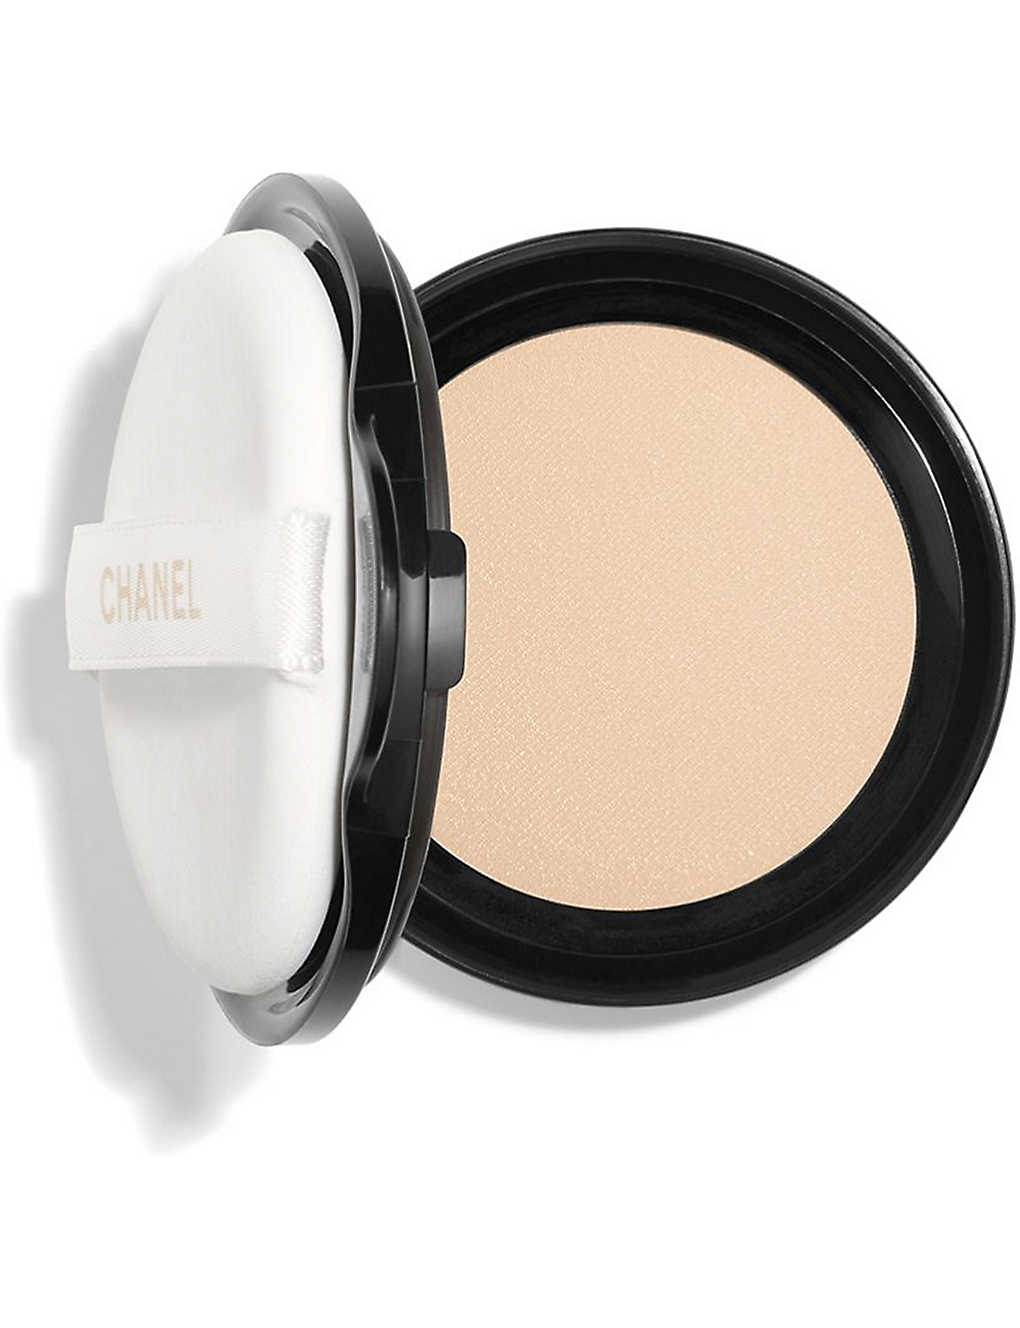 Beauty review: Chanel's new gel cushion foundation is great for Singapore's  hot weather